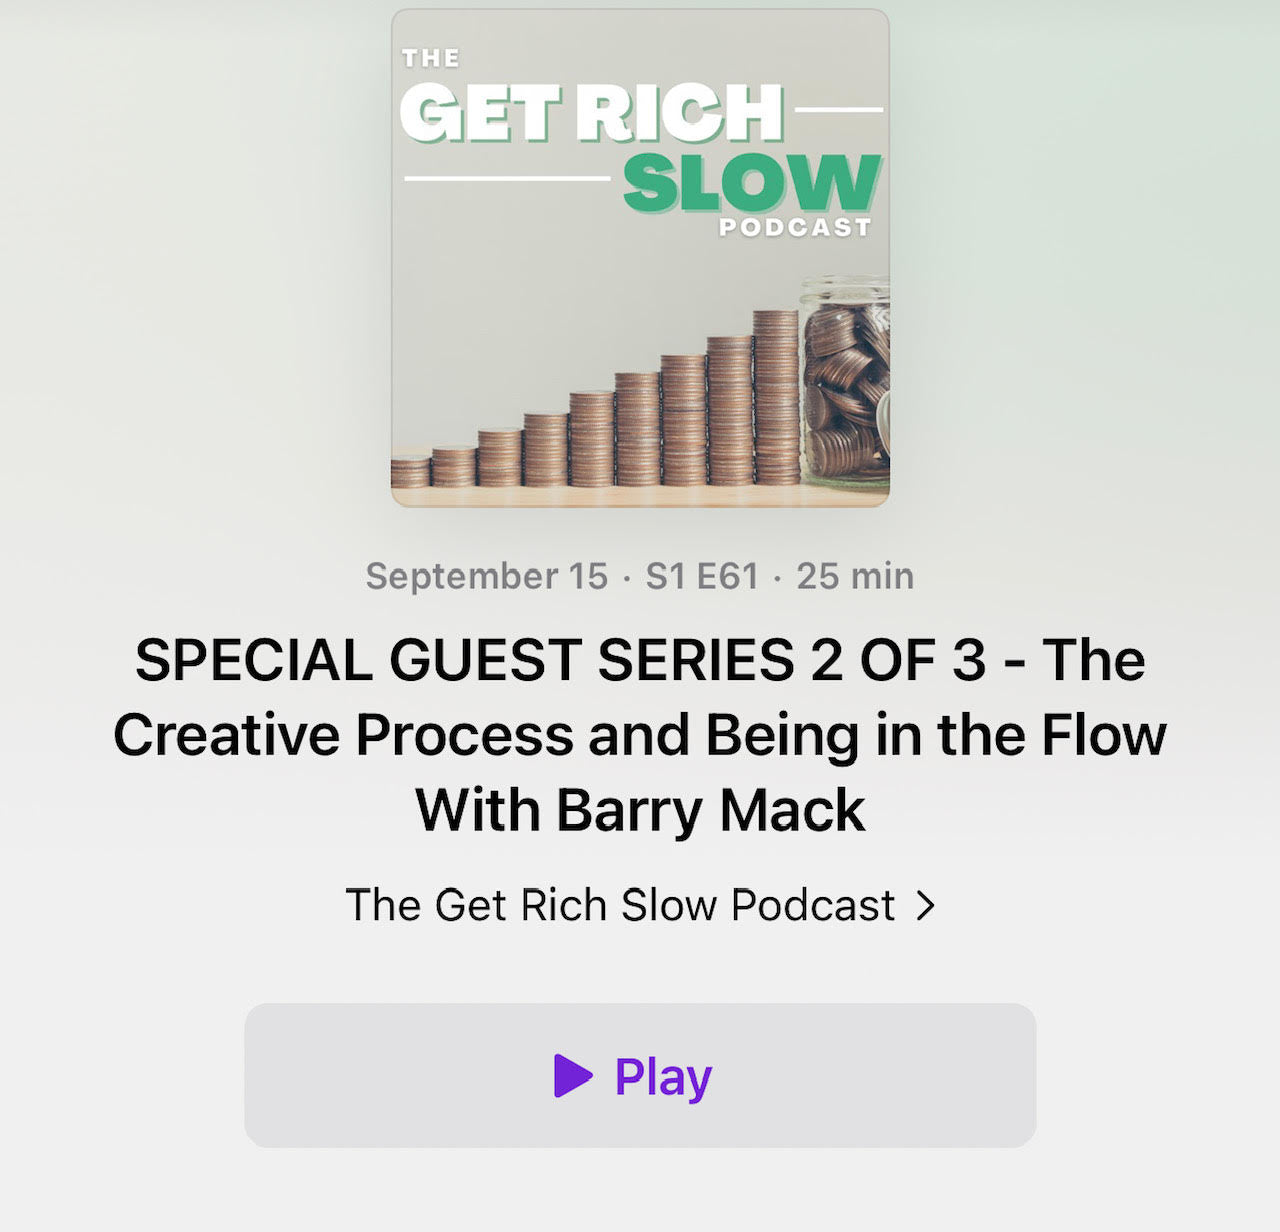 The Get Rich Slow Podcast 2 of 3